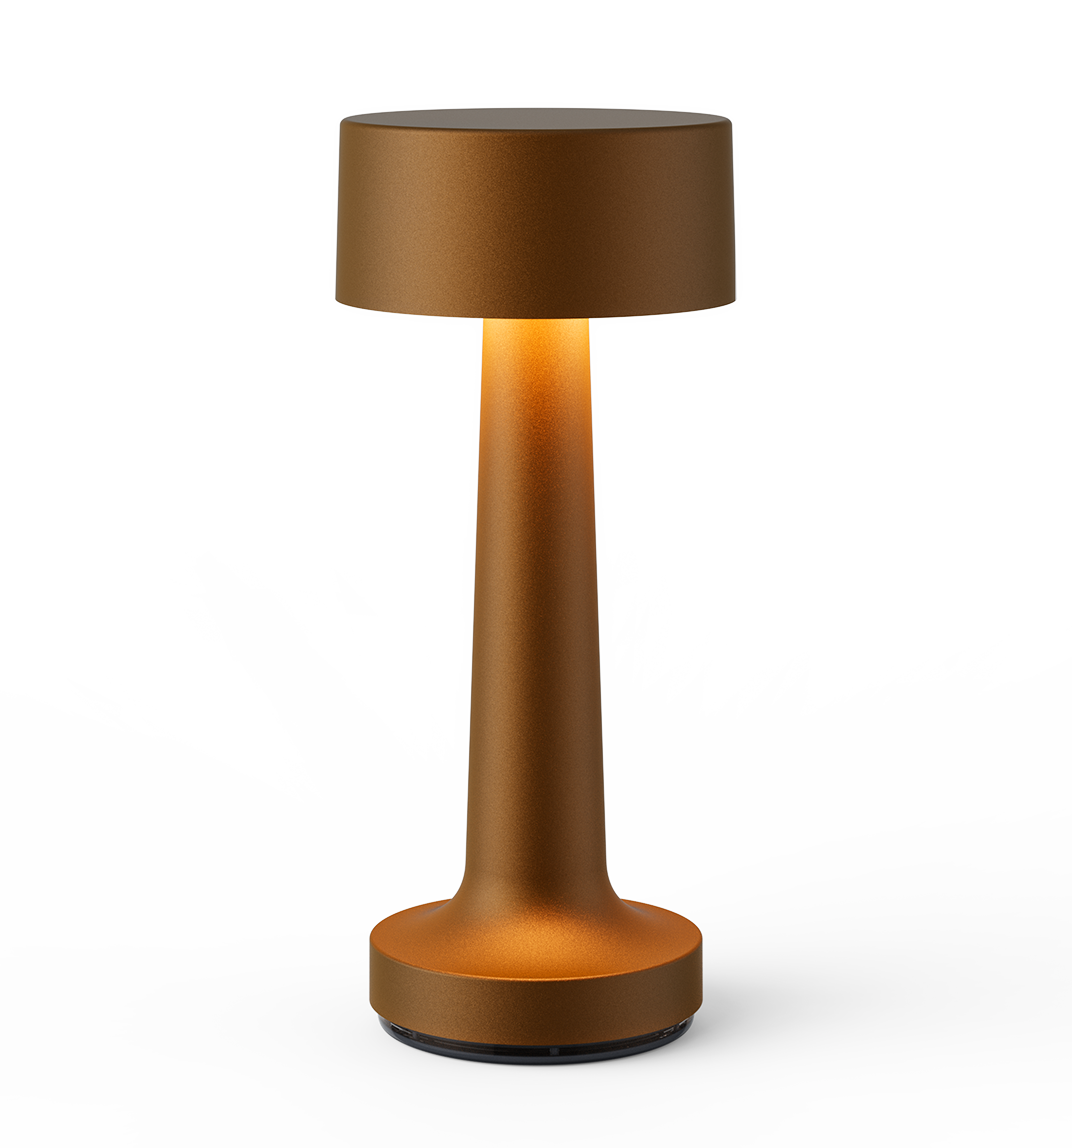 Cooee 2C Cordless Table Lamp by Neoz